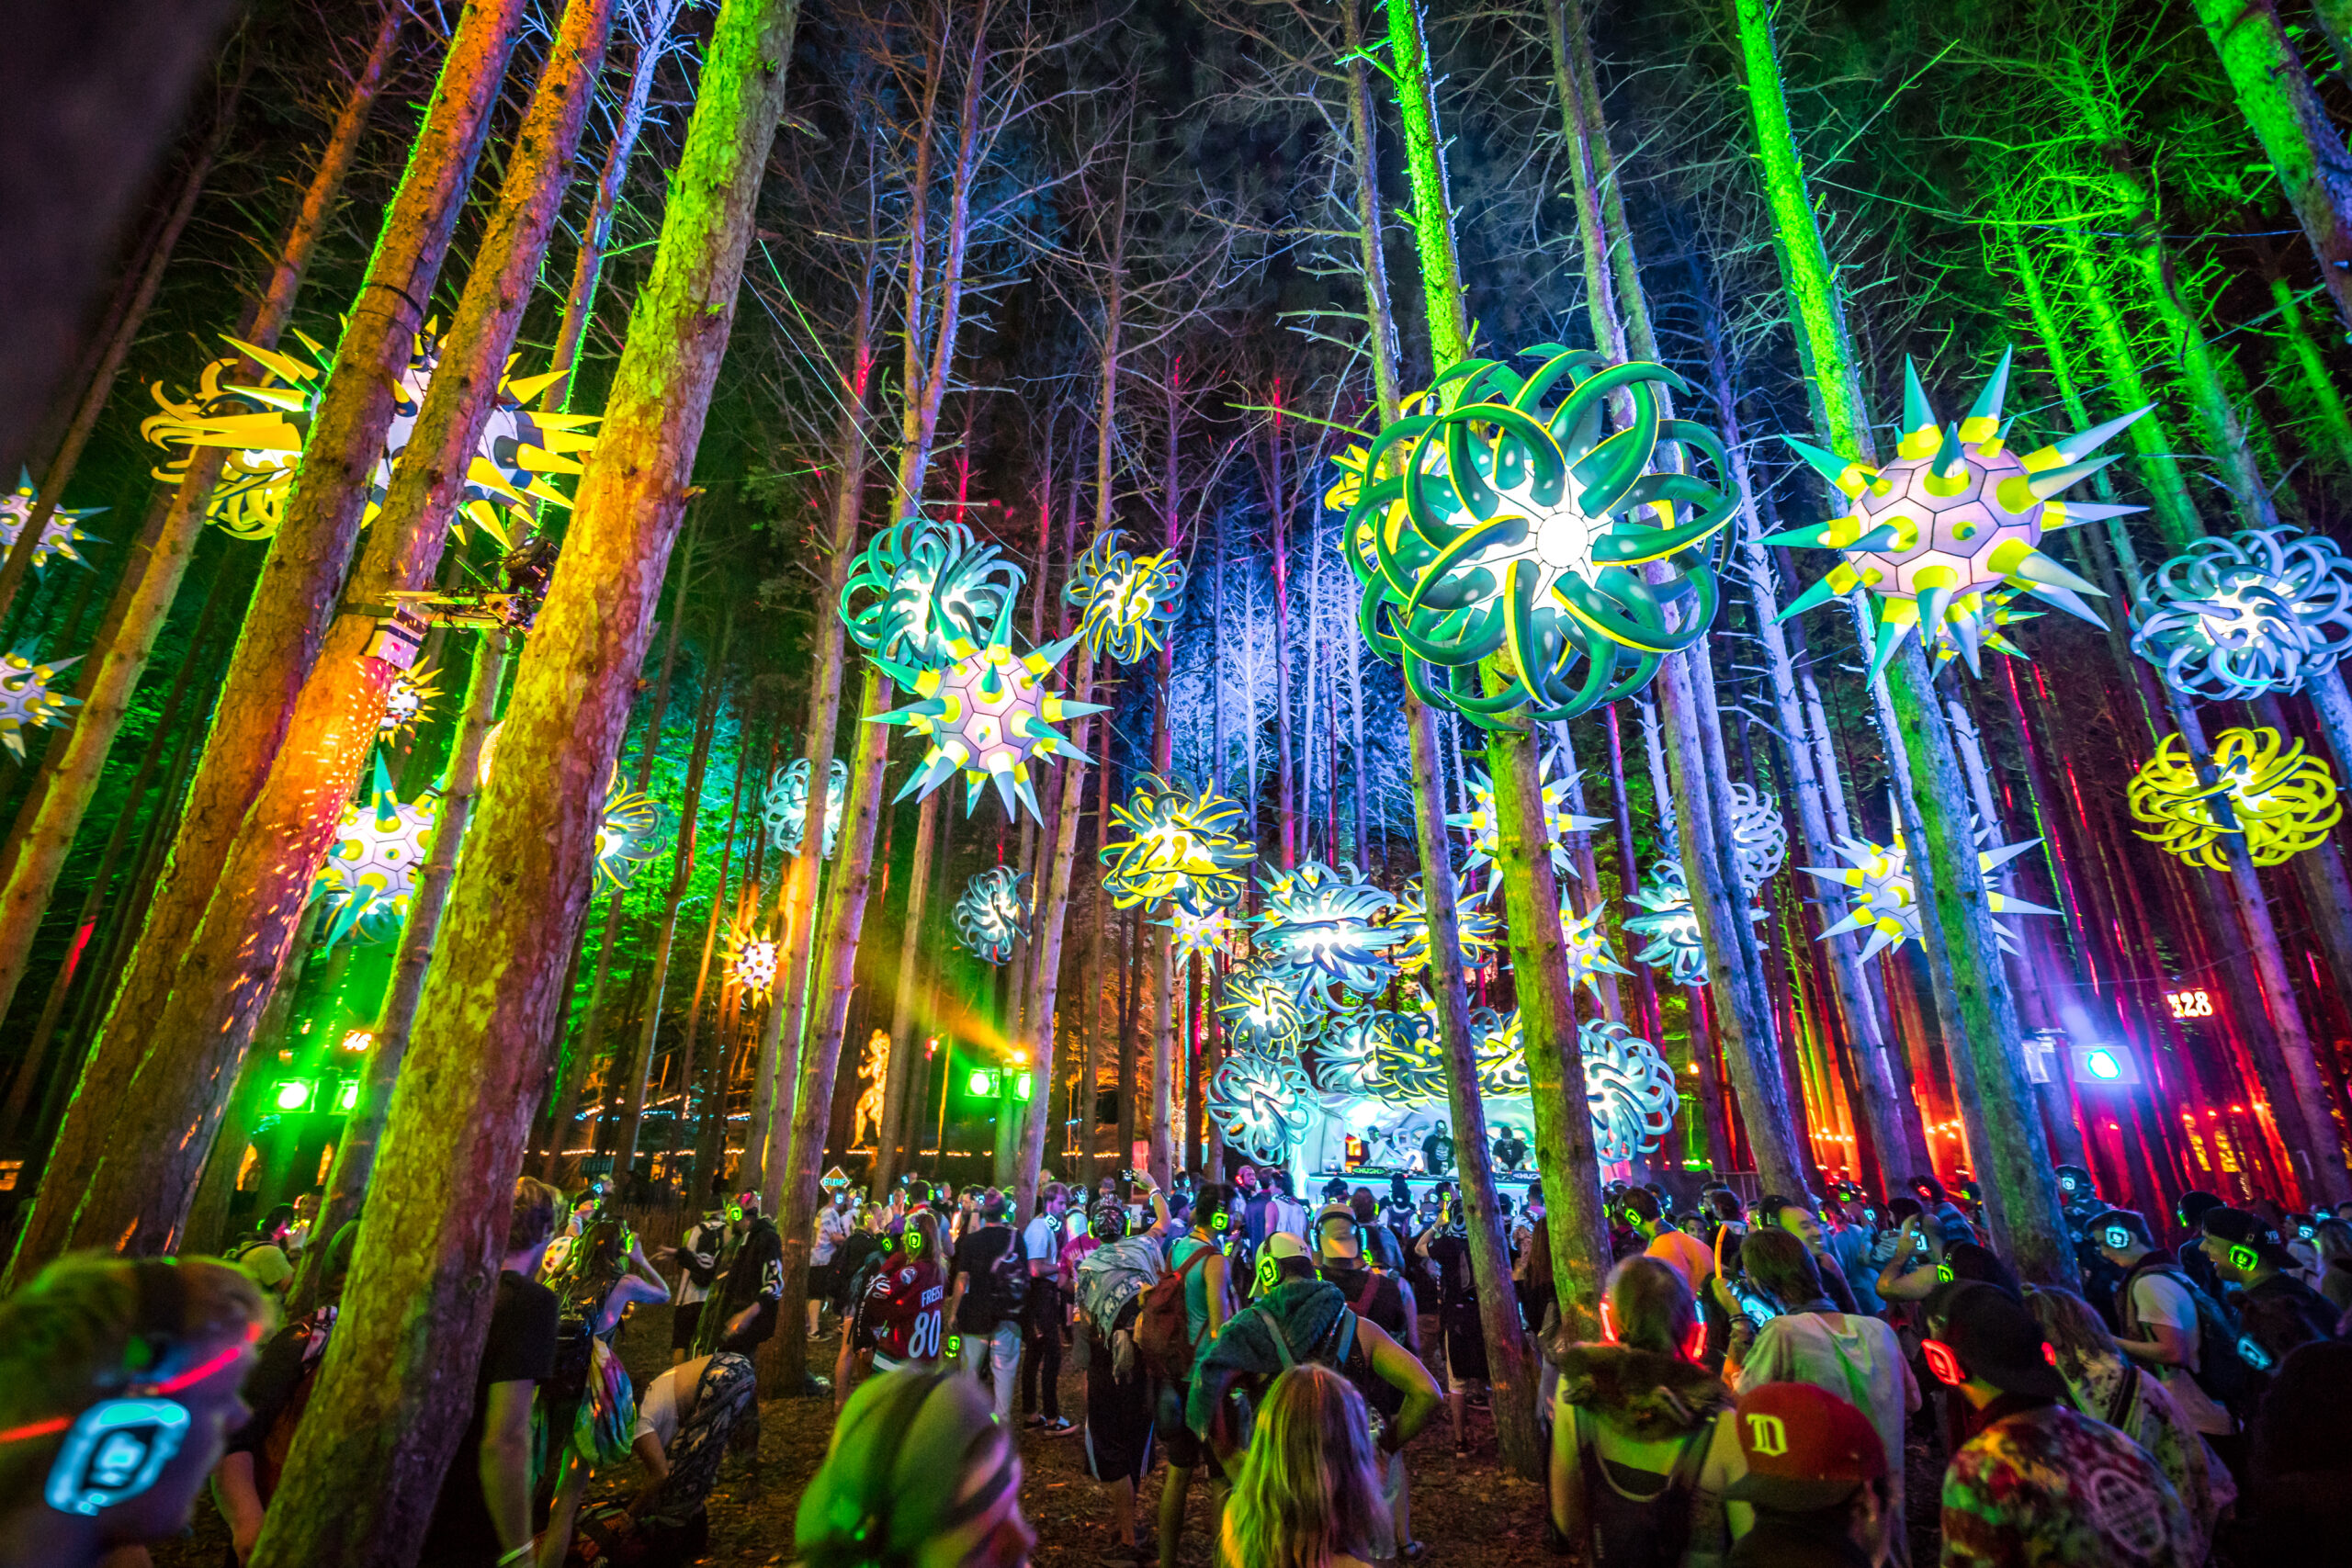 ODESZA, Madeon, ILLENIUM, More to Perform at Electric Forest 2023 -   - The Latest Electronic Dance Music News, Reviews & Artists